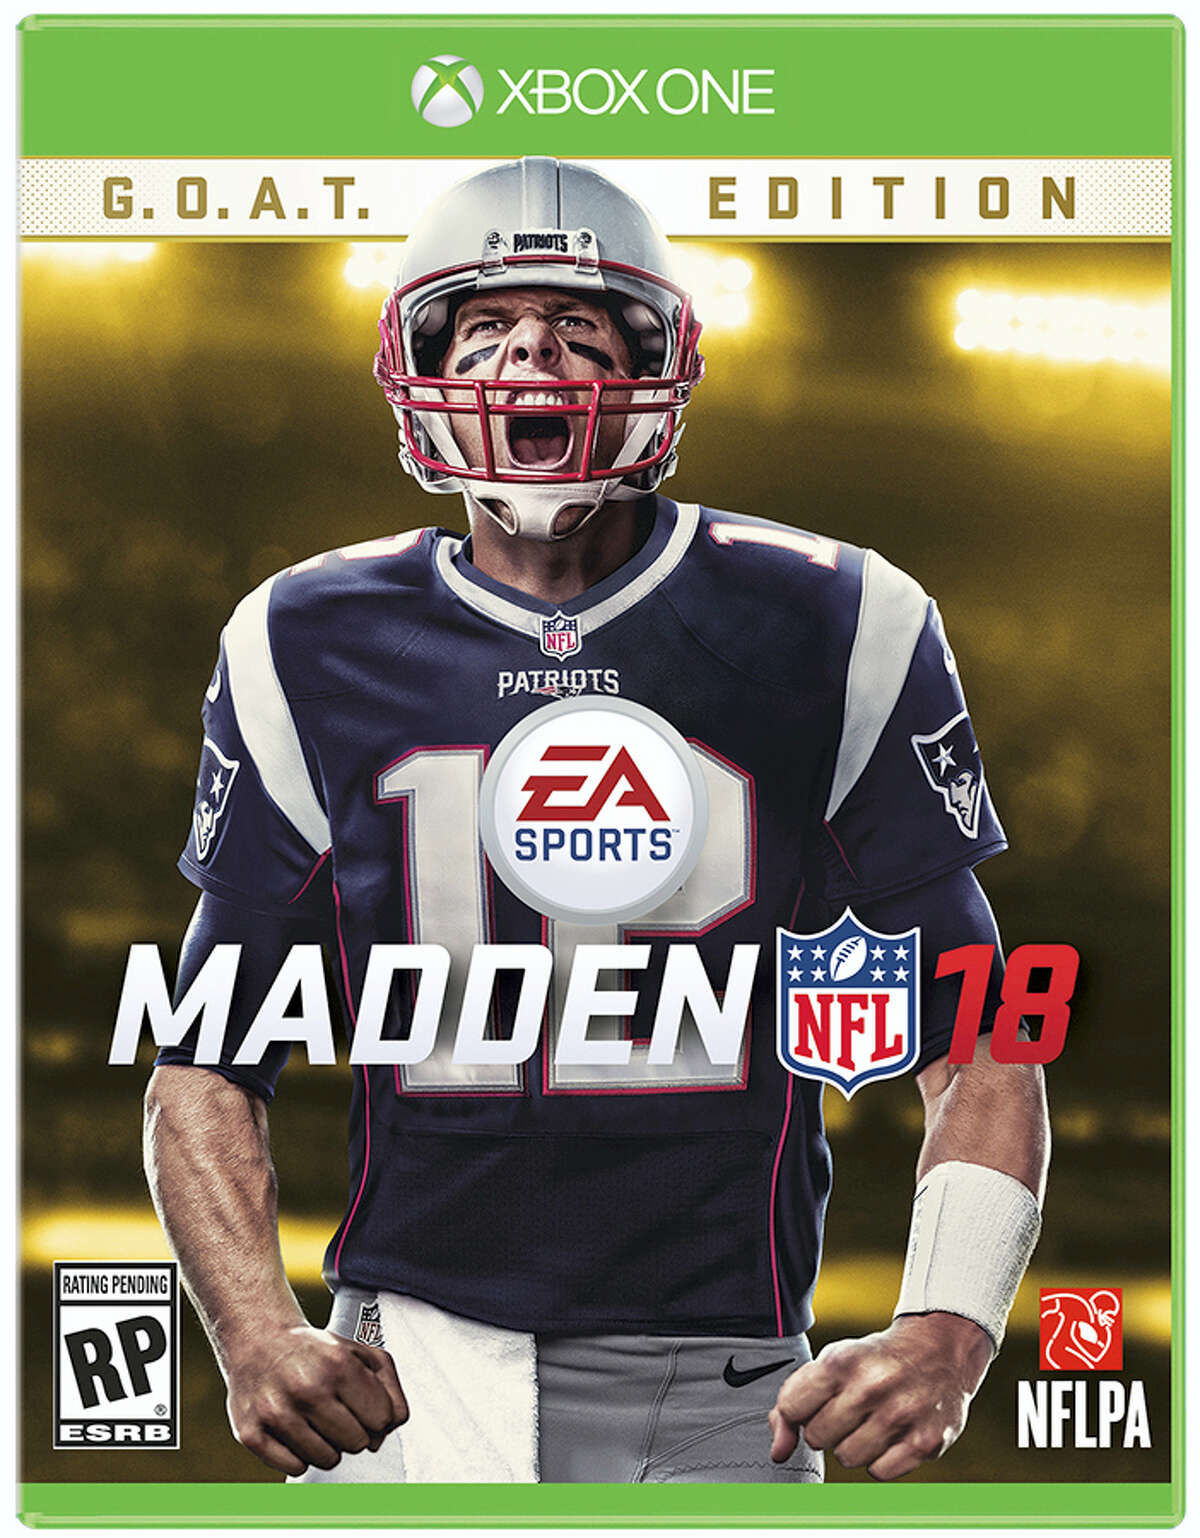 This image provided by EA Sports shows New England Patriots quarterback Tom Brady on the cover of the Madden 18 video game.